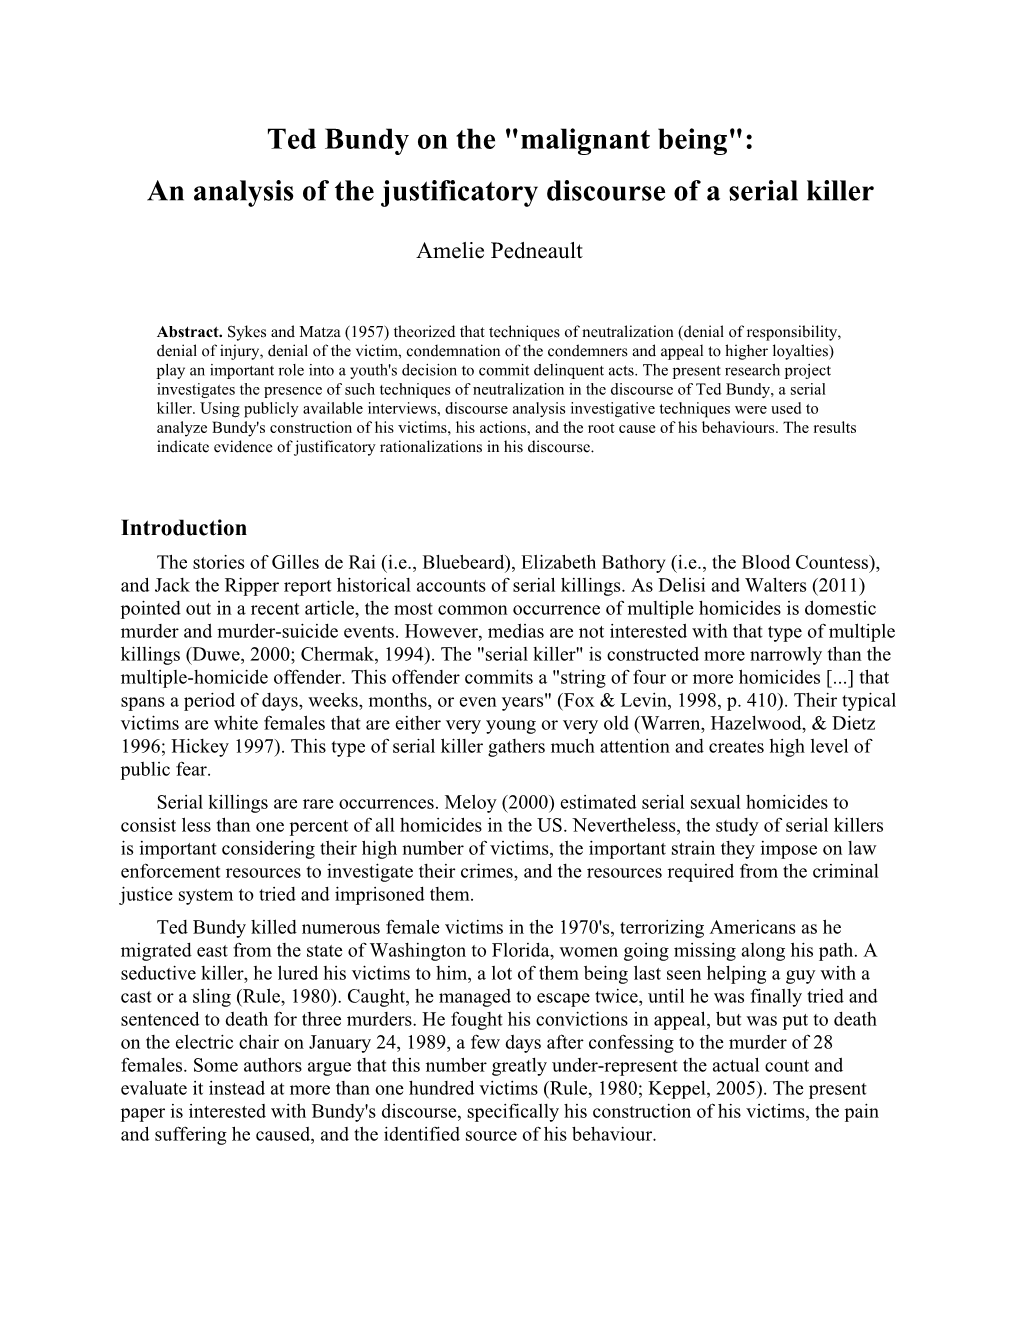 Ted Bundy on the "Malignant Being": an Analysis of the Justificatory Discourse of a Serial Killer